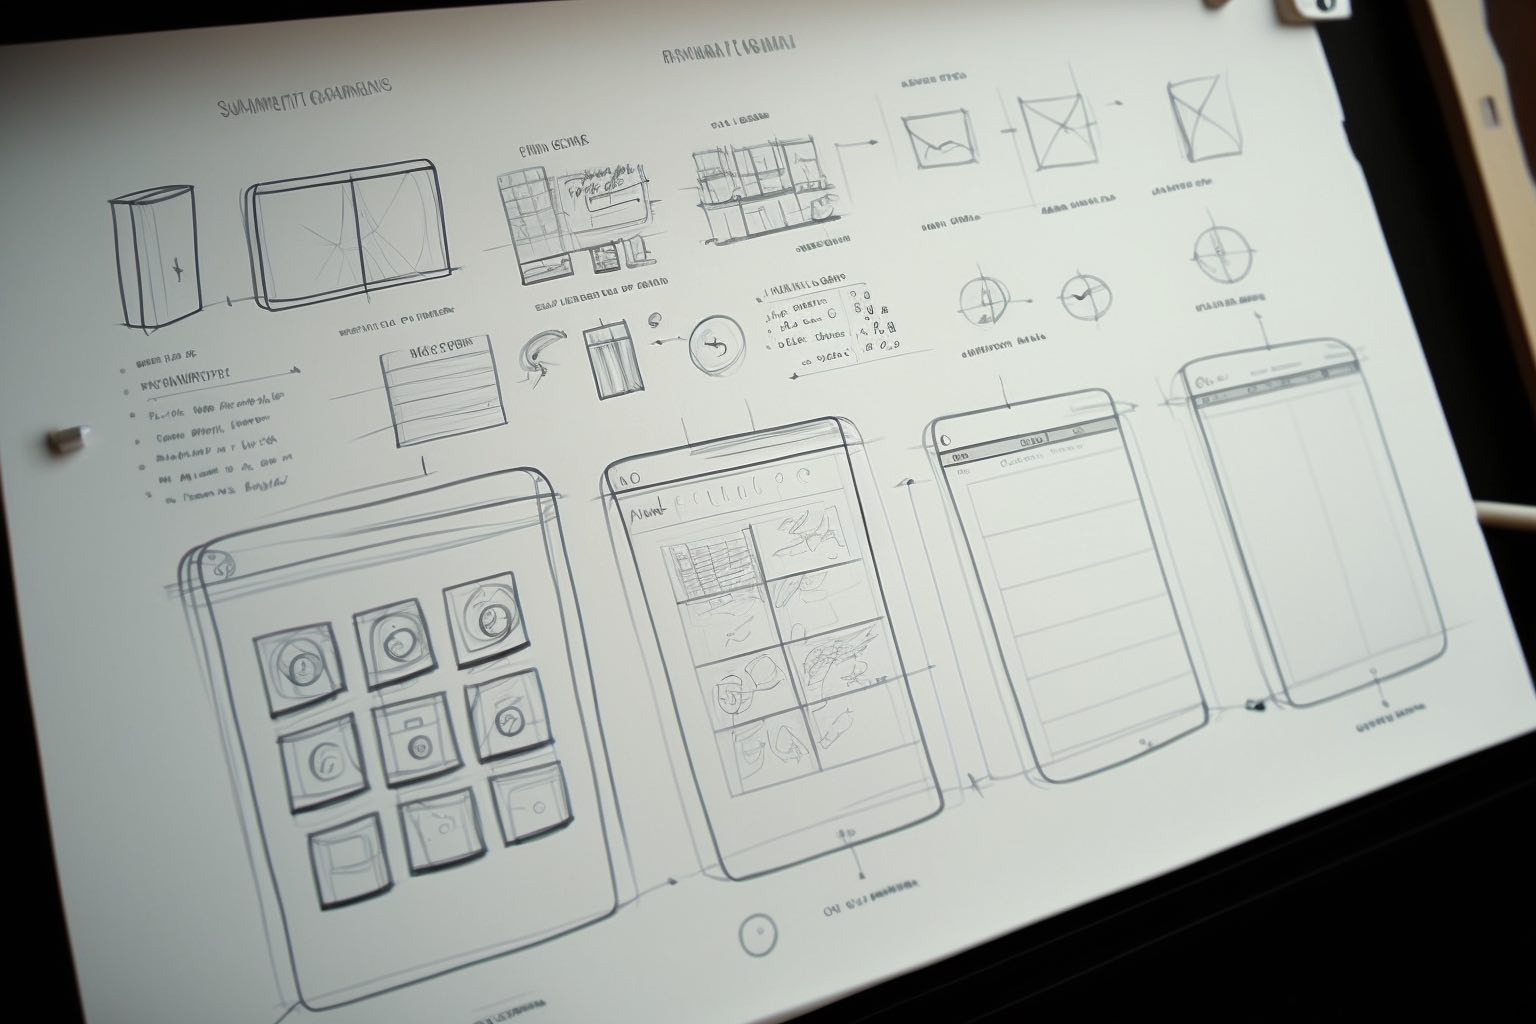 5 Reasons Why Good UI/UX Design Can Enhance Your Brand’s Reputation